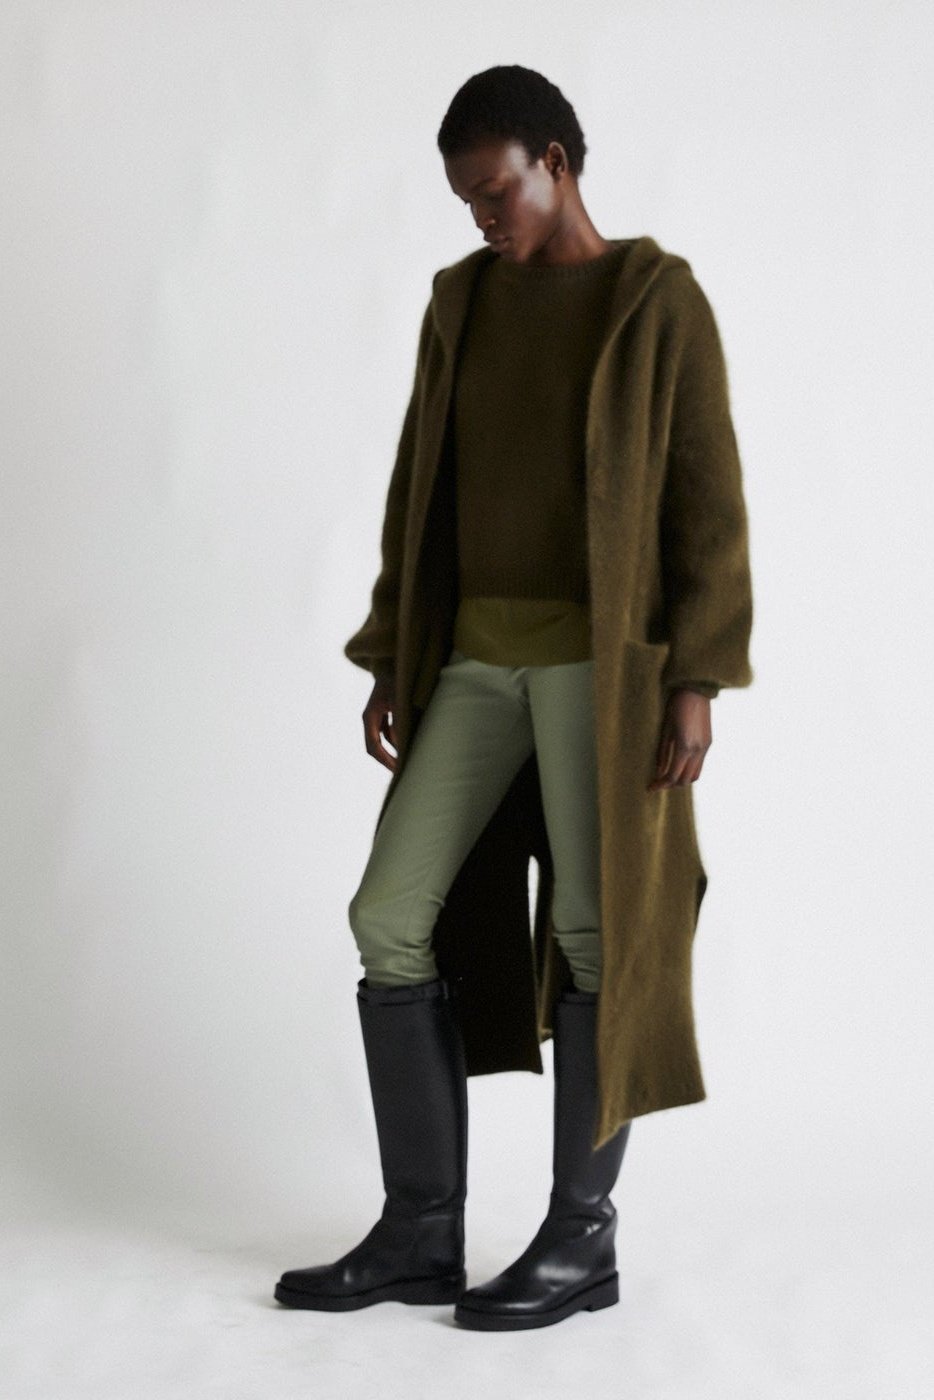 +Beryll Cashmere Coat with Hood | Kelp Green - +Beryll Cashmere Coat with Hood | Kelp Green - +Beryll Worn By Good People